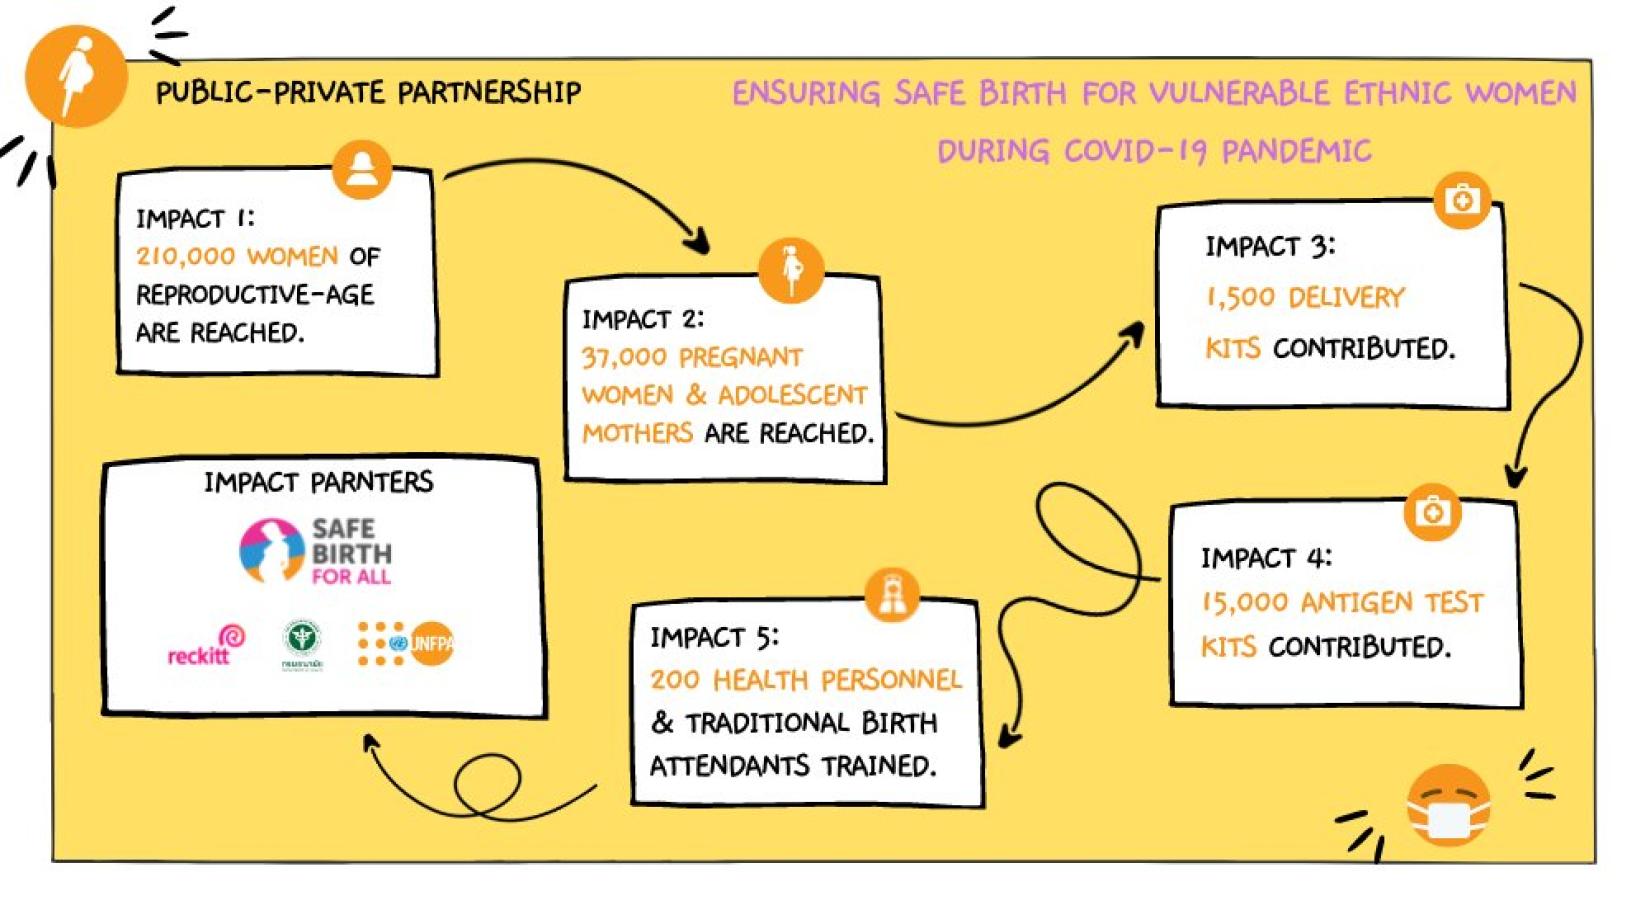 Ensure Safe Birth for Vulnerable Ethnic Women during COVID-19 Pandemic